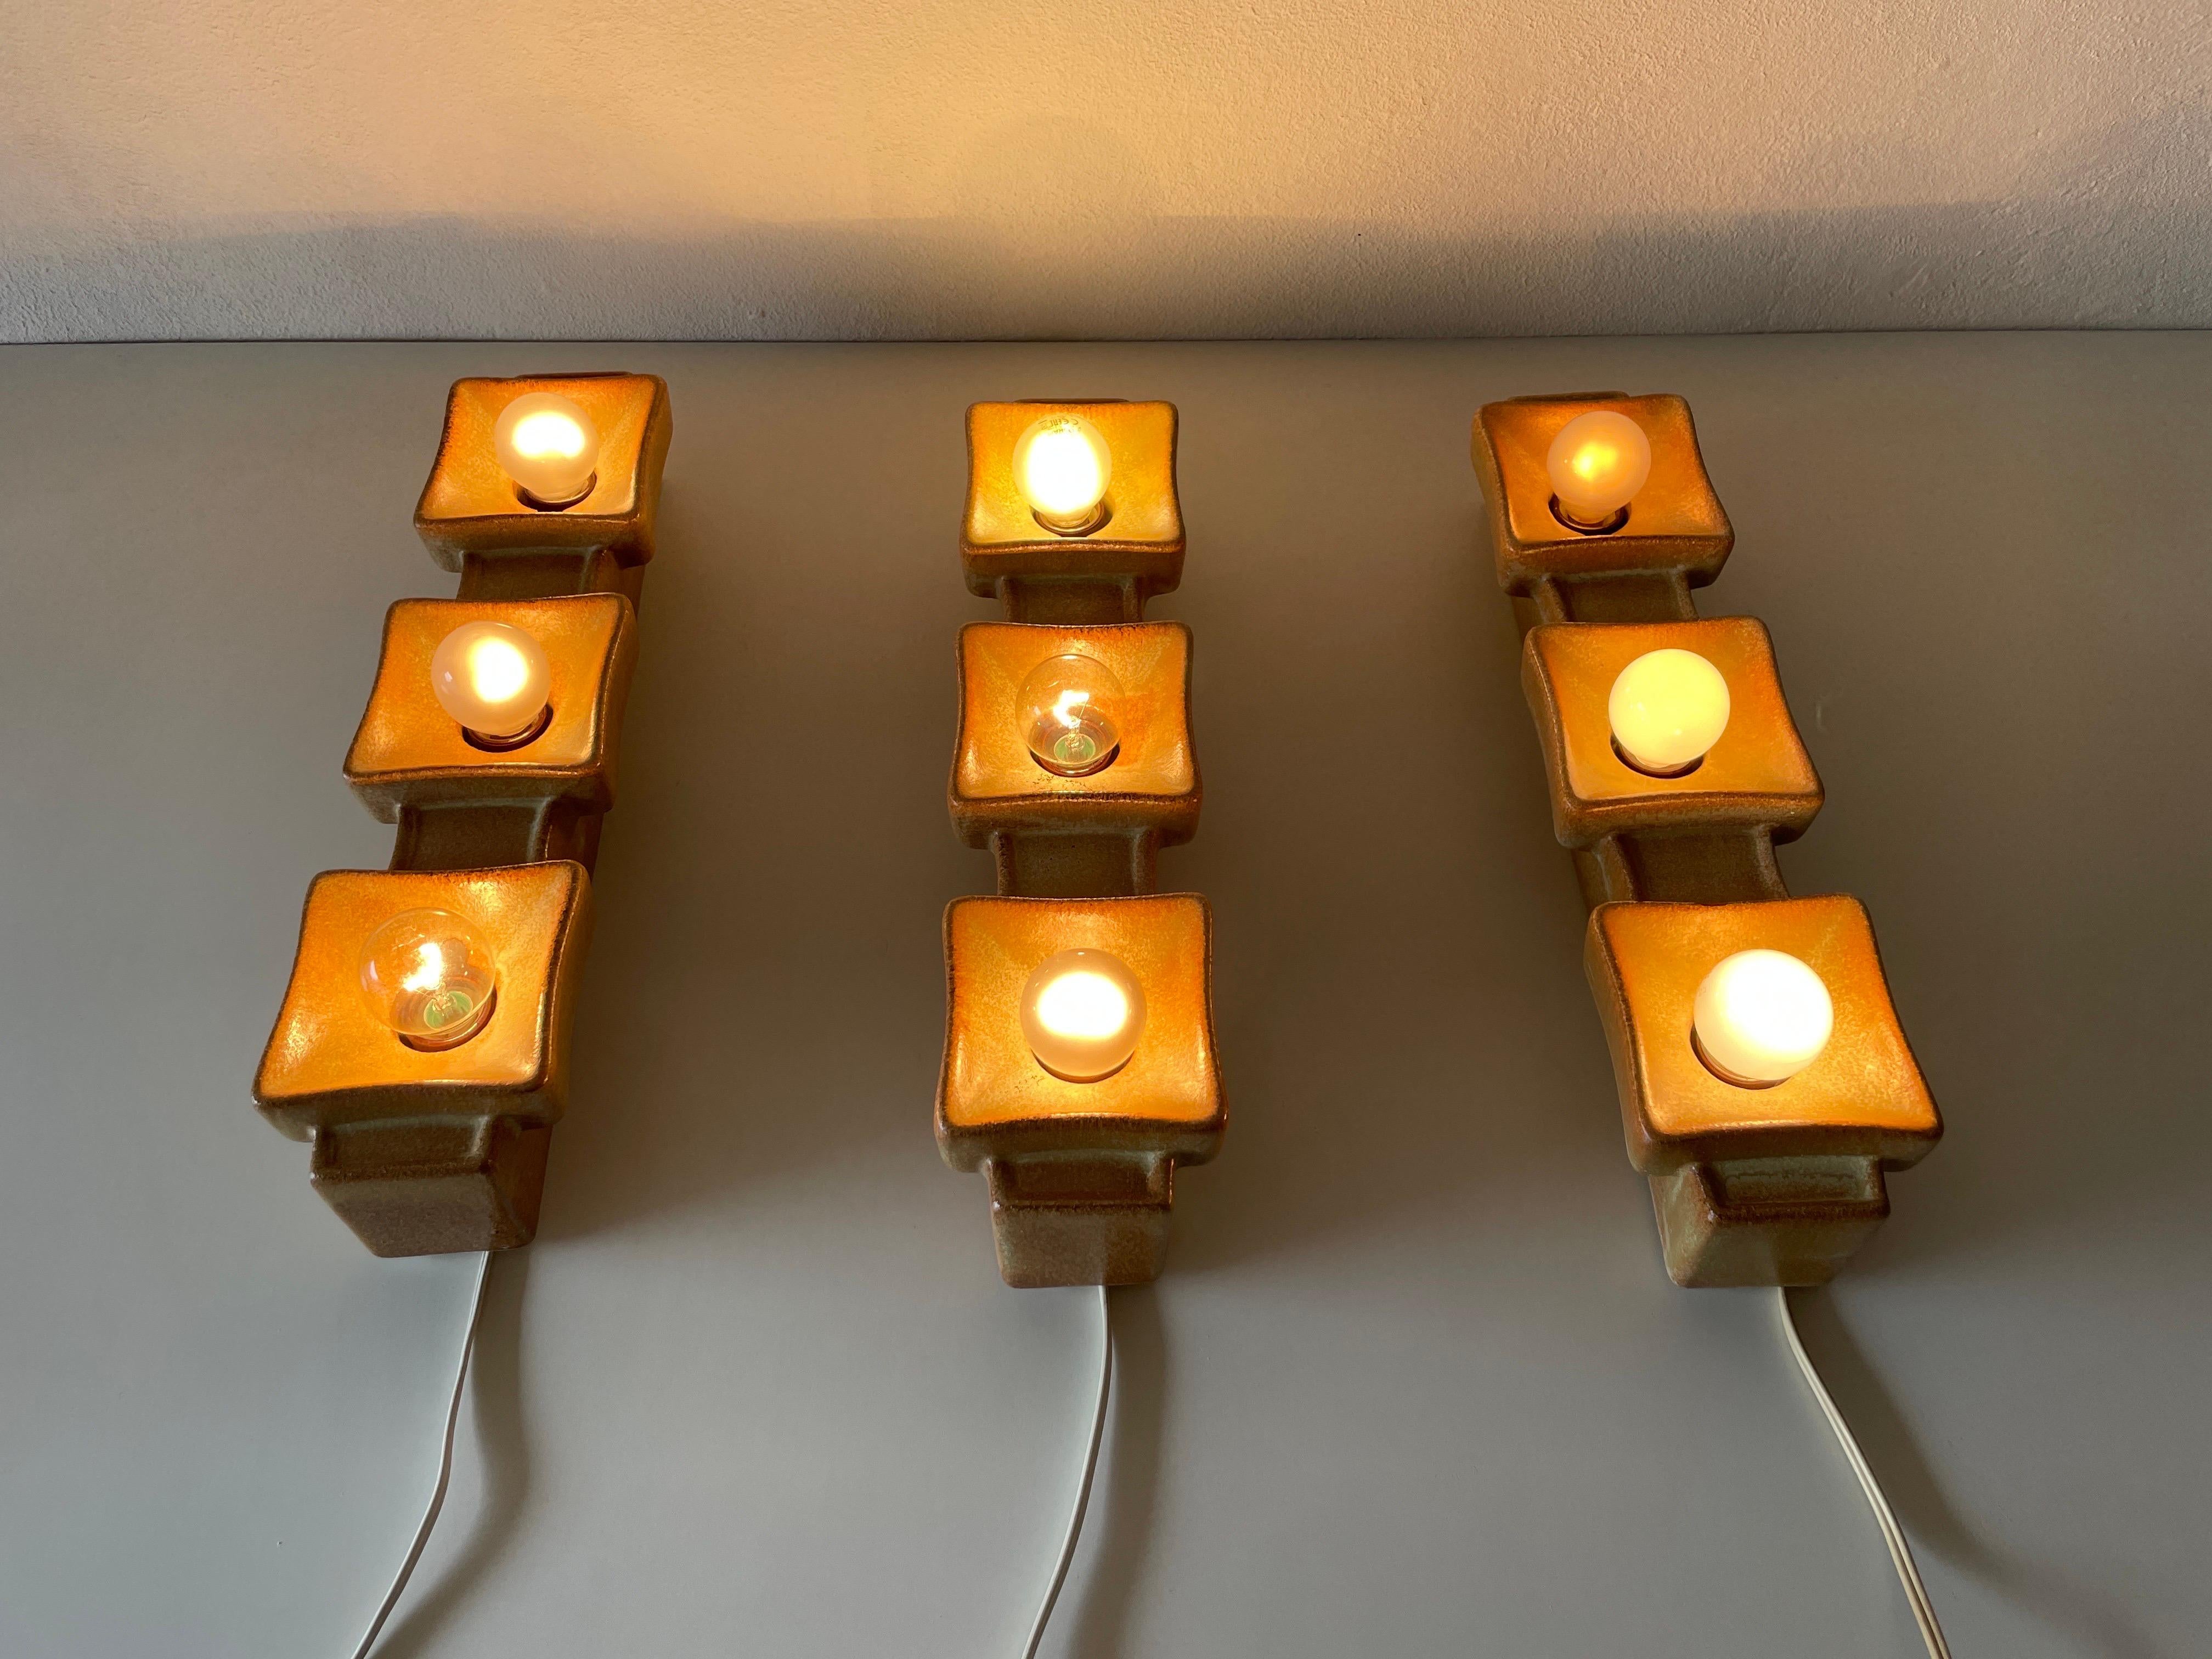 Brown Ceramic Set of 3 Sconces by Pan Leuchten, 1970s, Germany For Sale 7